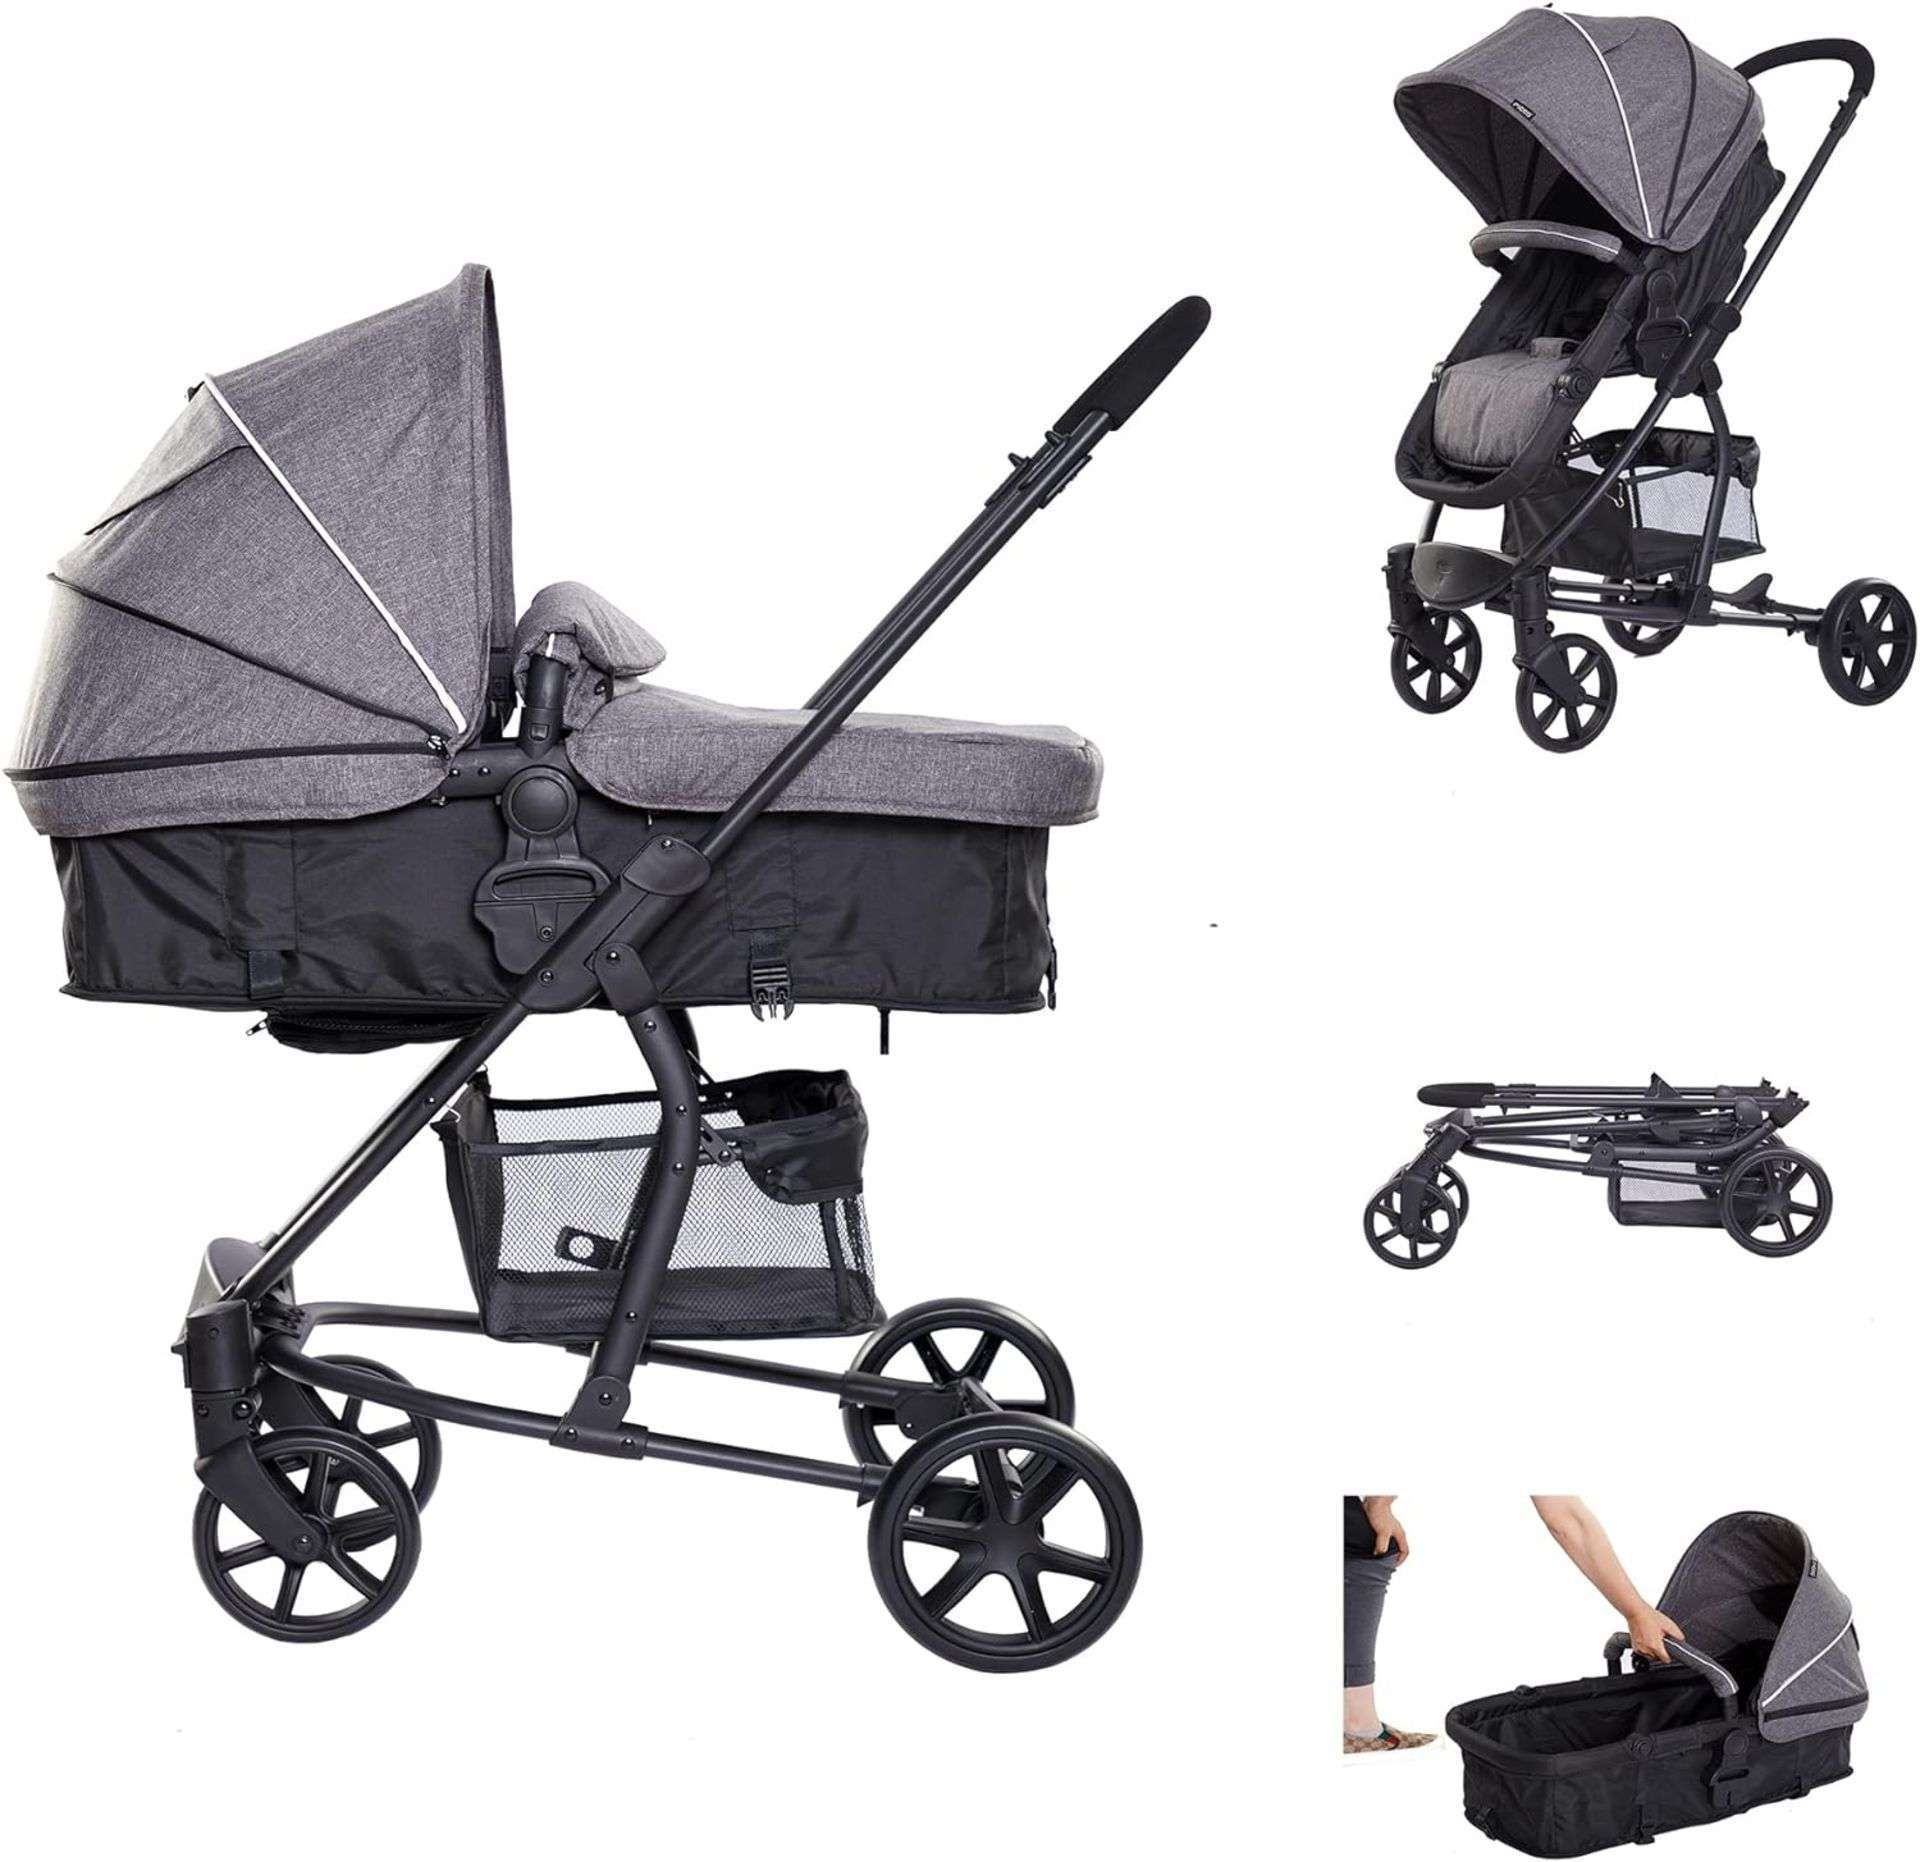 TRADE LOT 5 X BRAND NEW RICCO BABY 2 IN 1 FOLDABLE BUGGY STROLLER PUSHCHAIR GREY R18-7 - Image 4 of 4